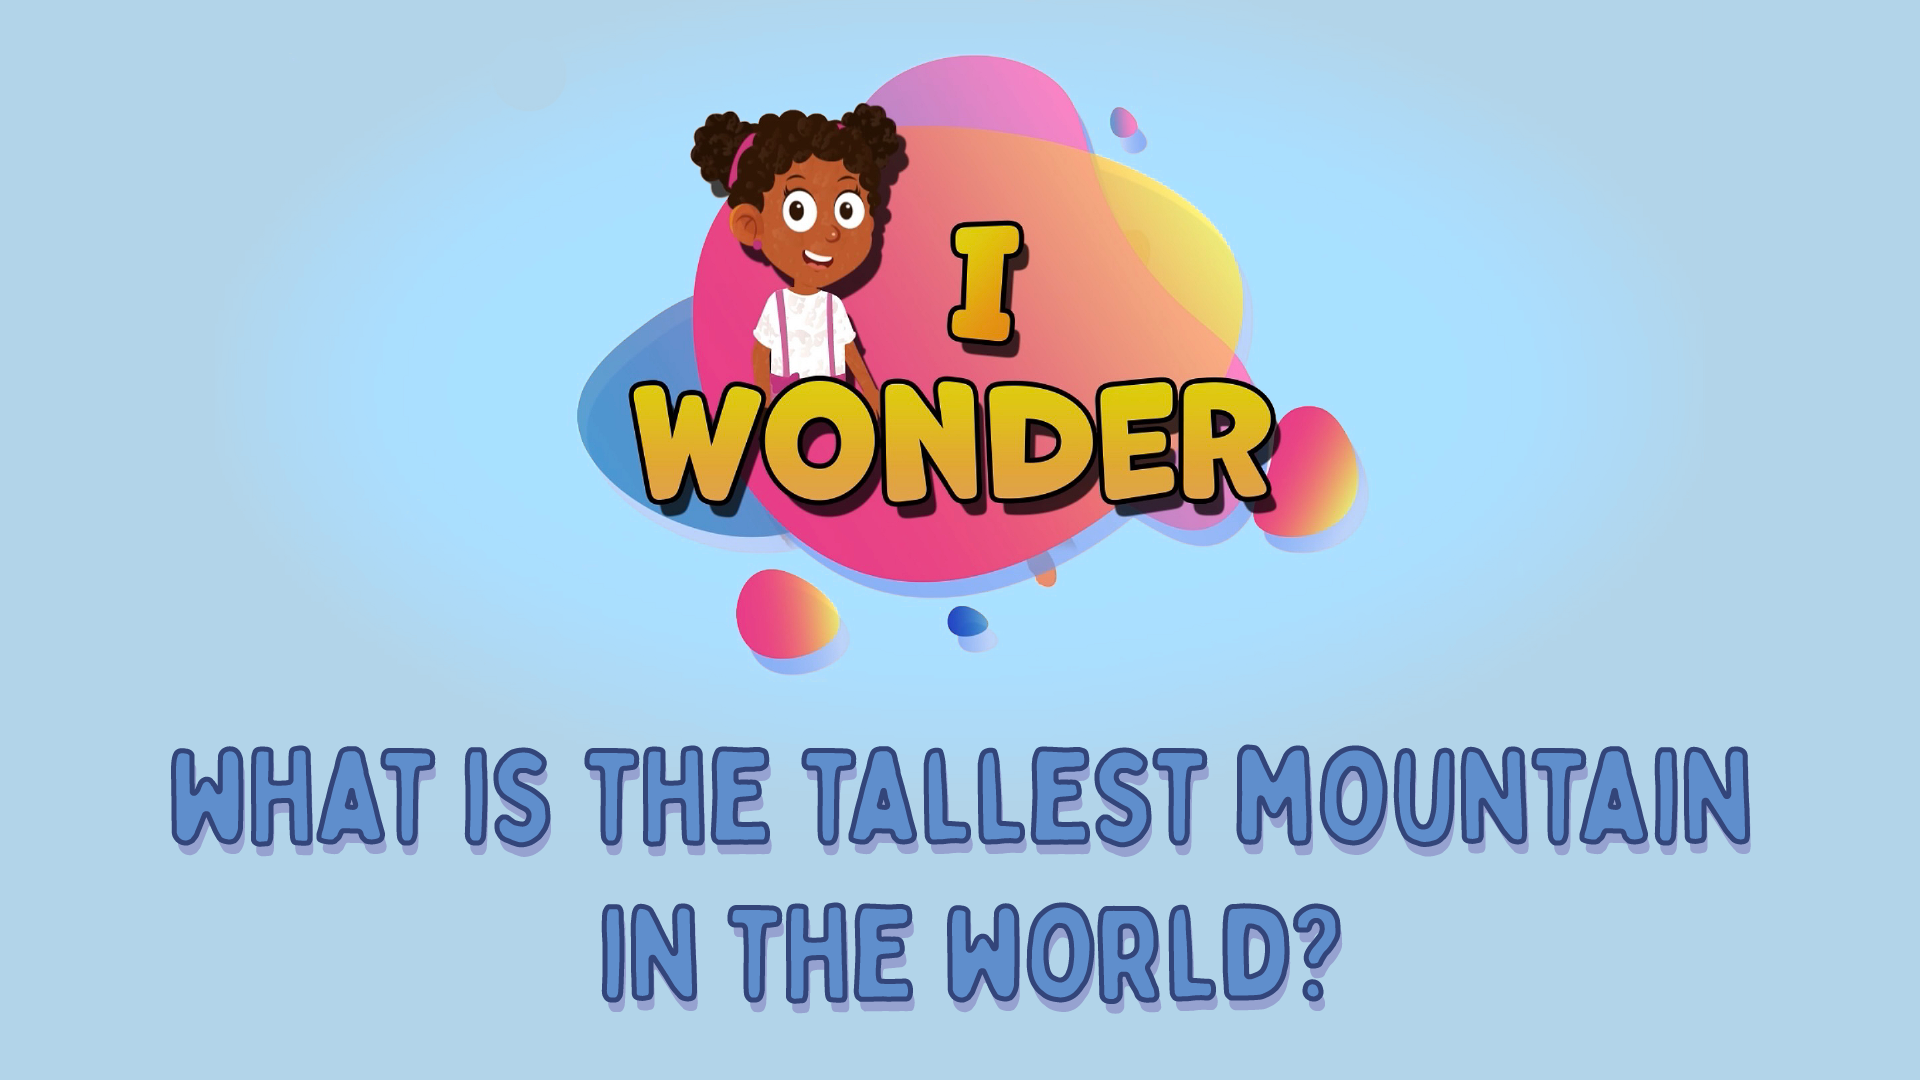 What Is The Tallest Mountain In The World?